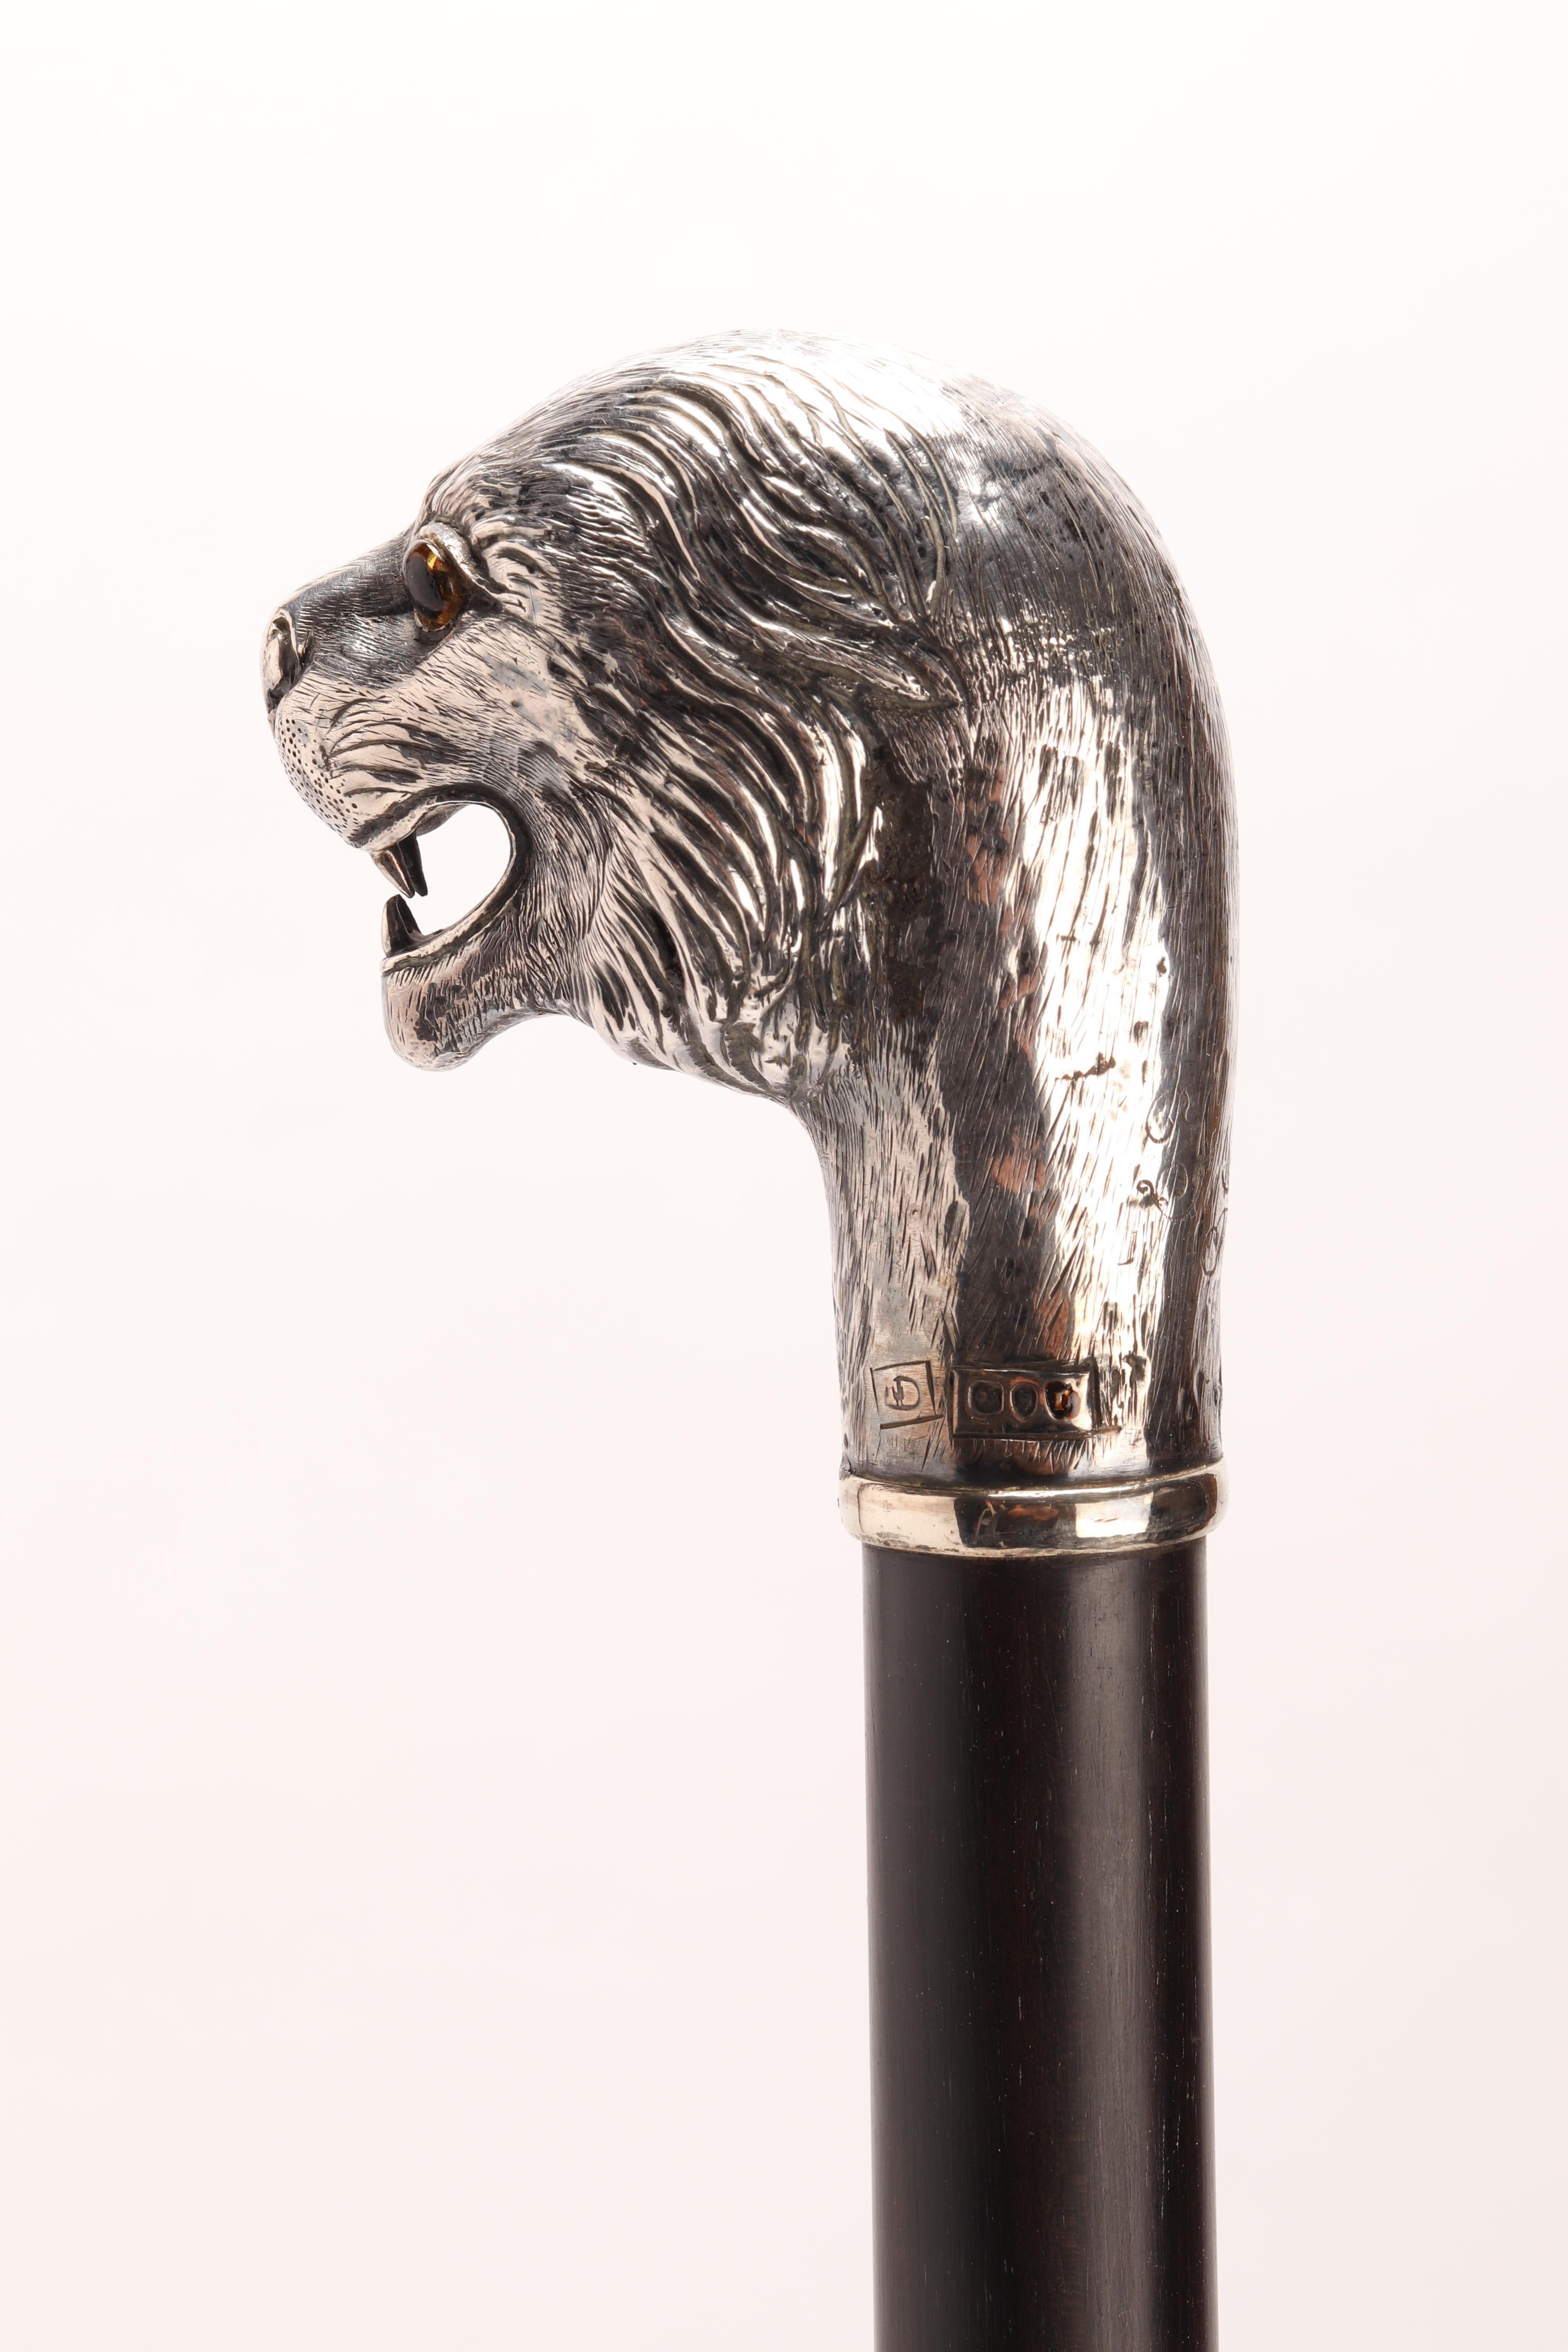 Silver Walking Stick with a Lion, London, 1900 1